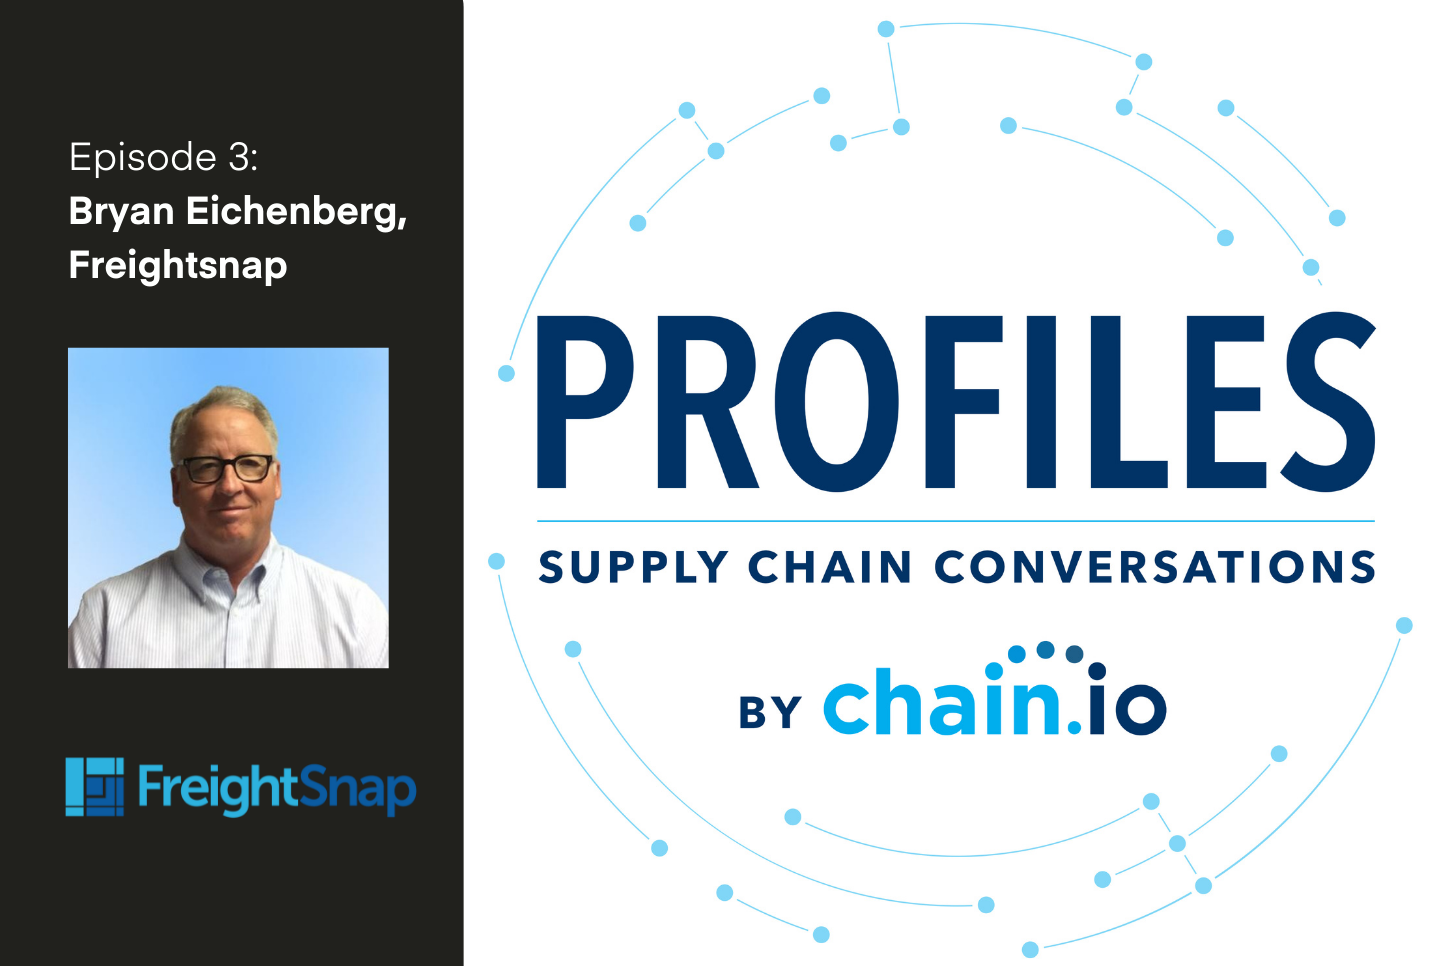 Bryan Eichenberg of FreightSnap joins Brian Glick of Chain.io to discuss AR updates to the FreightSnap app, advice for developers trying to introduce process changes, and more. 